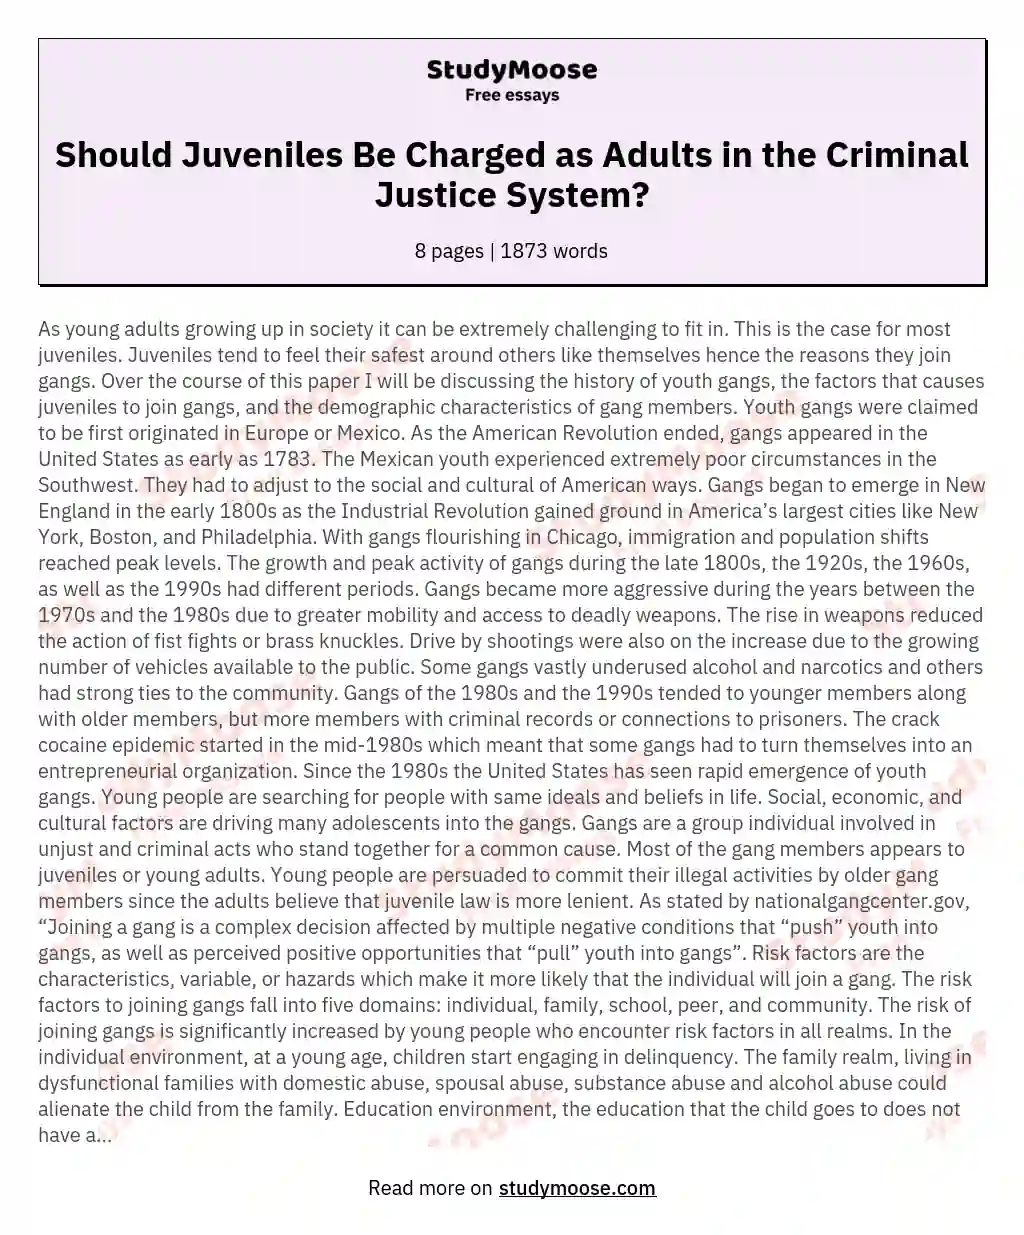 Should Juveniles Be Charged as Adults in the Criminal Justice System?